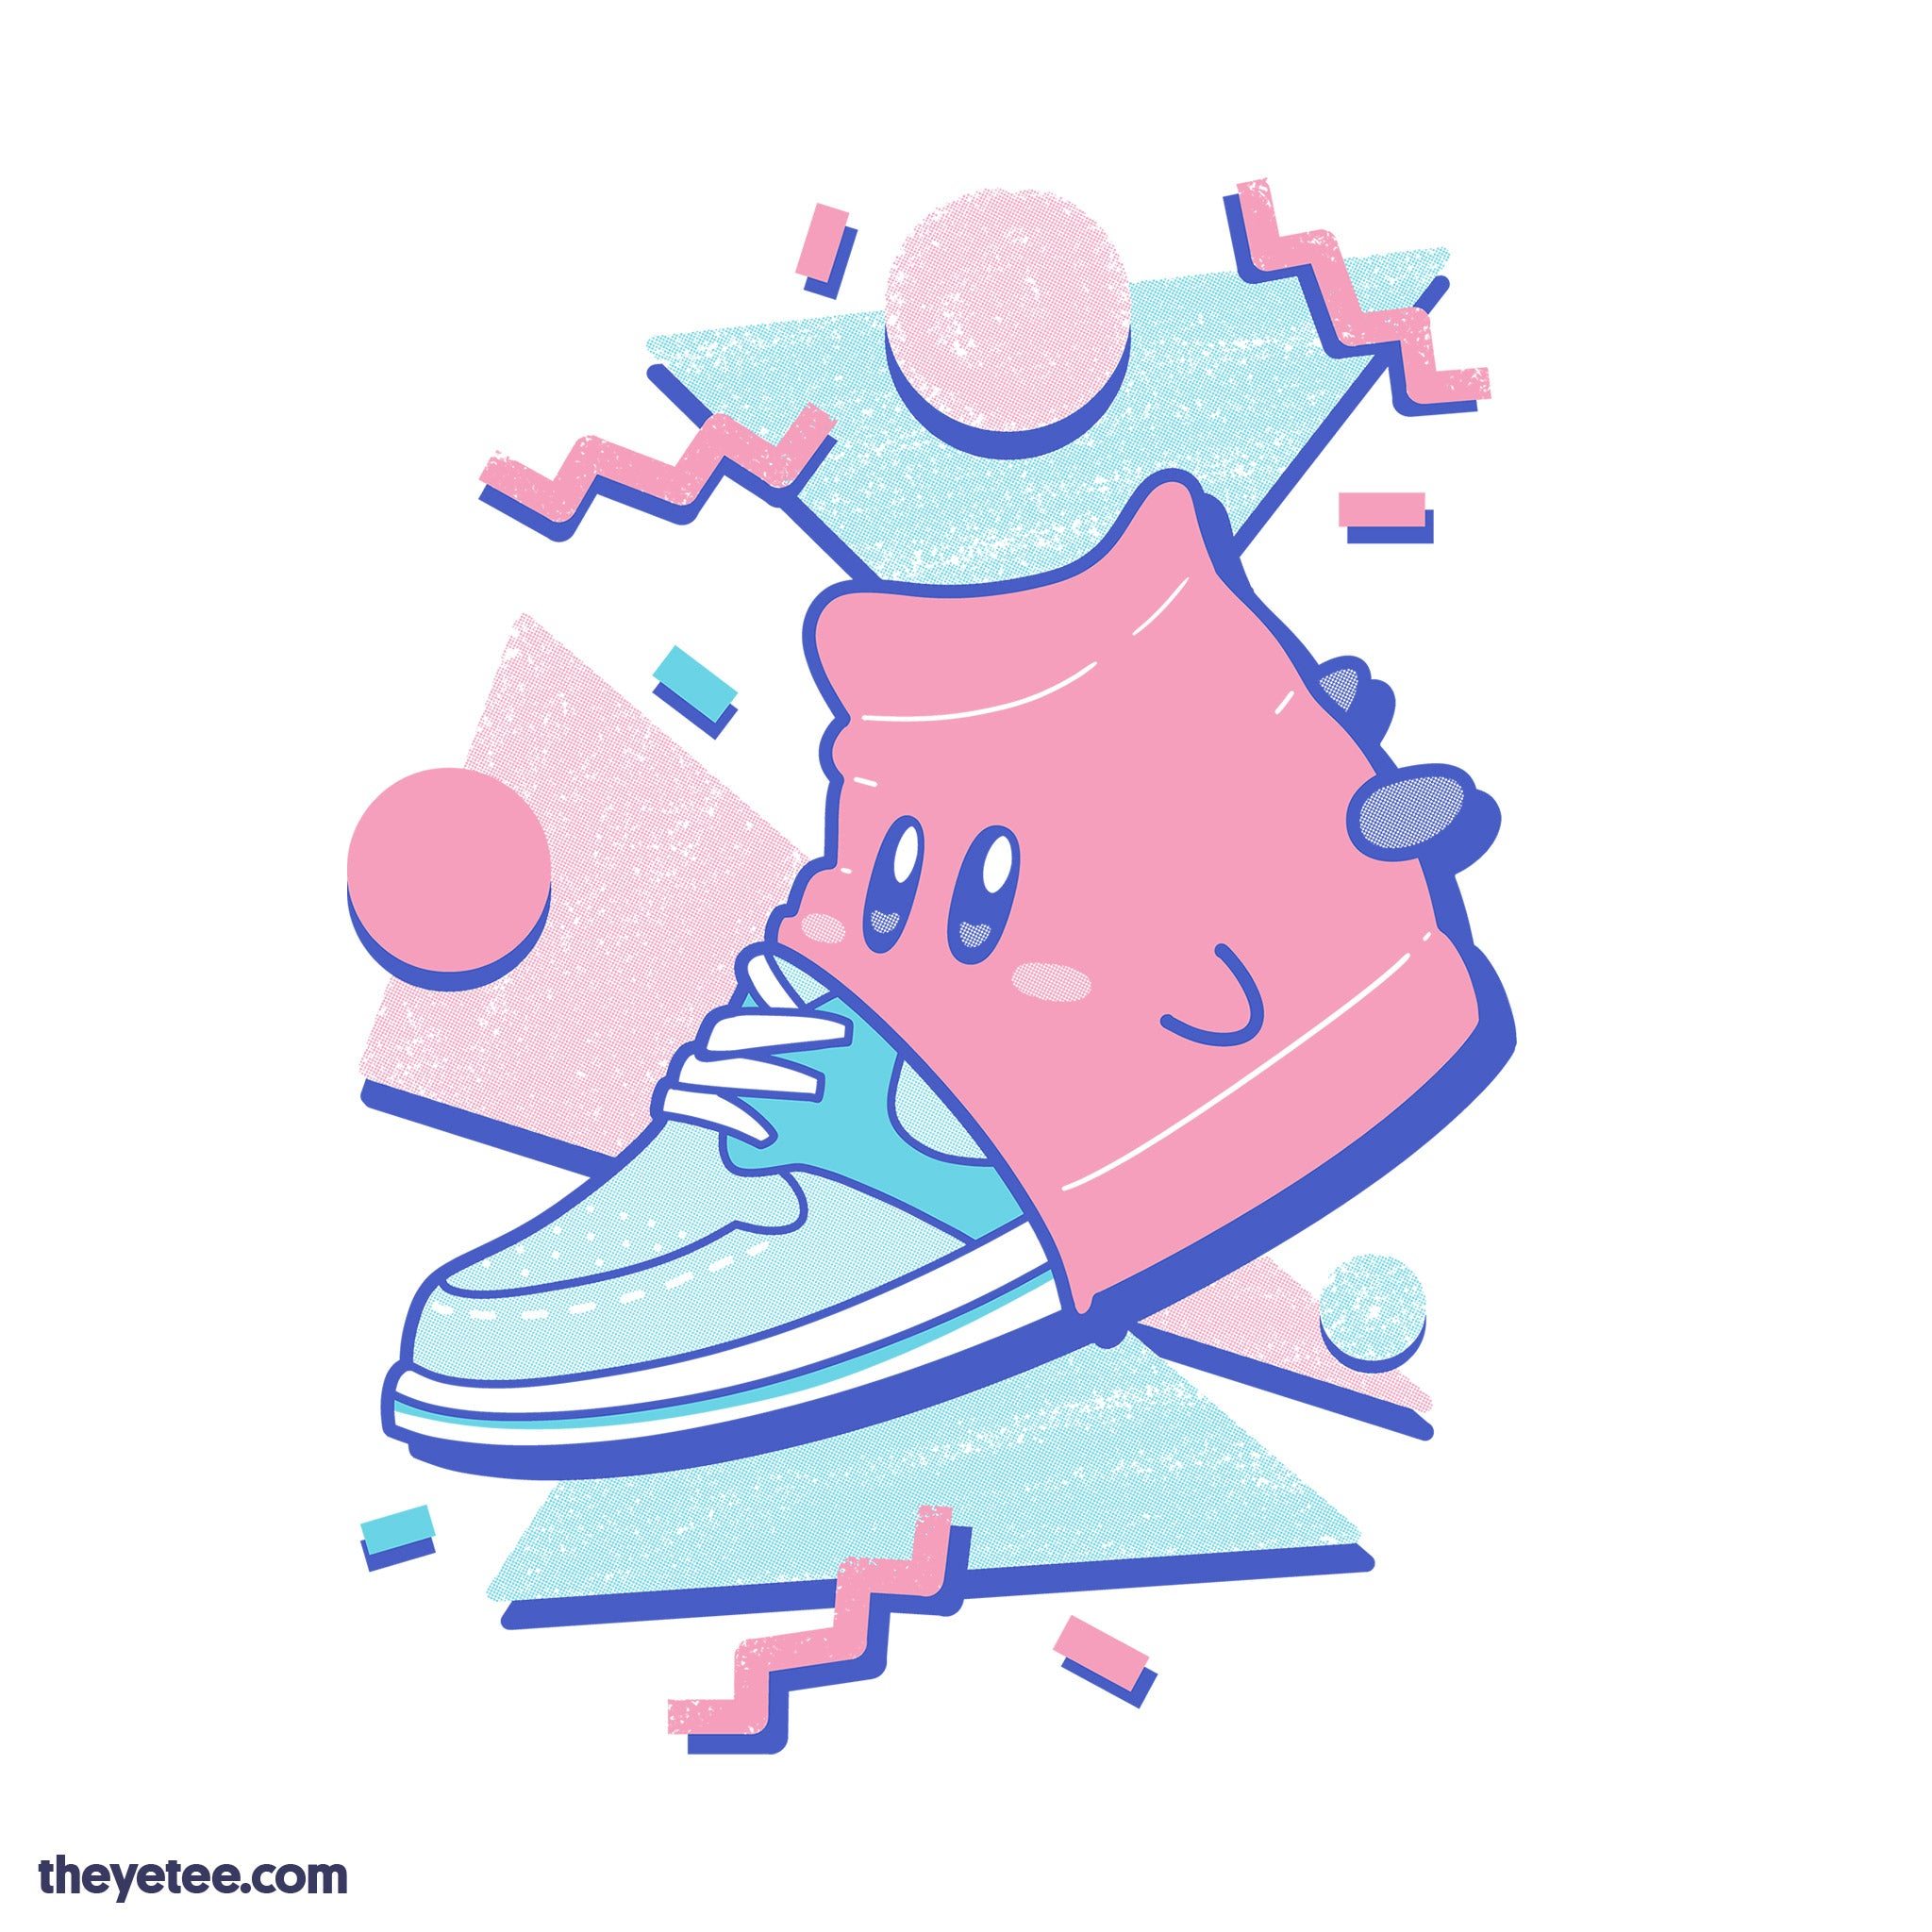 Image of Sneaker Mouth